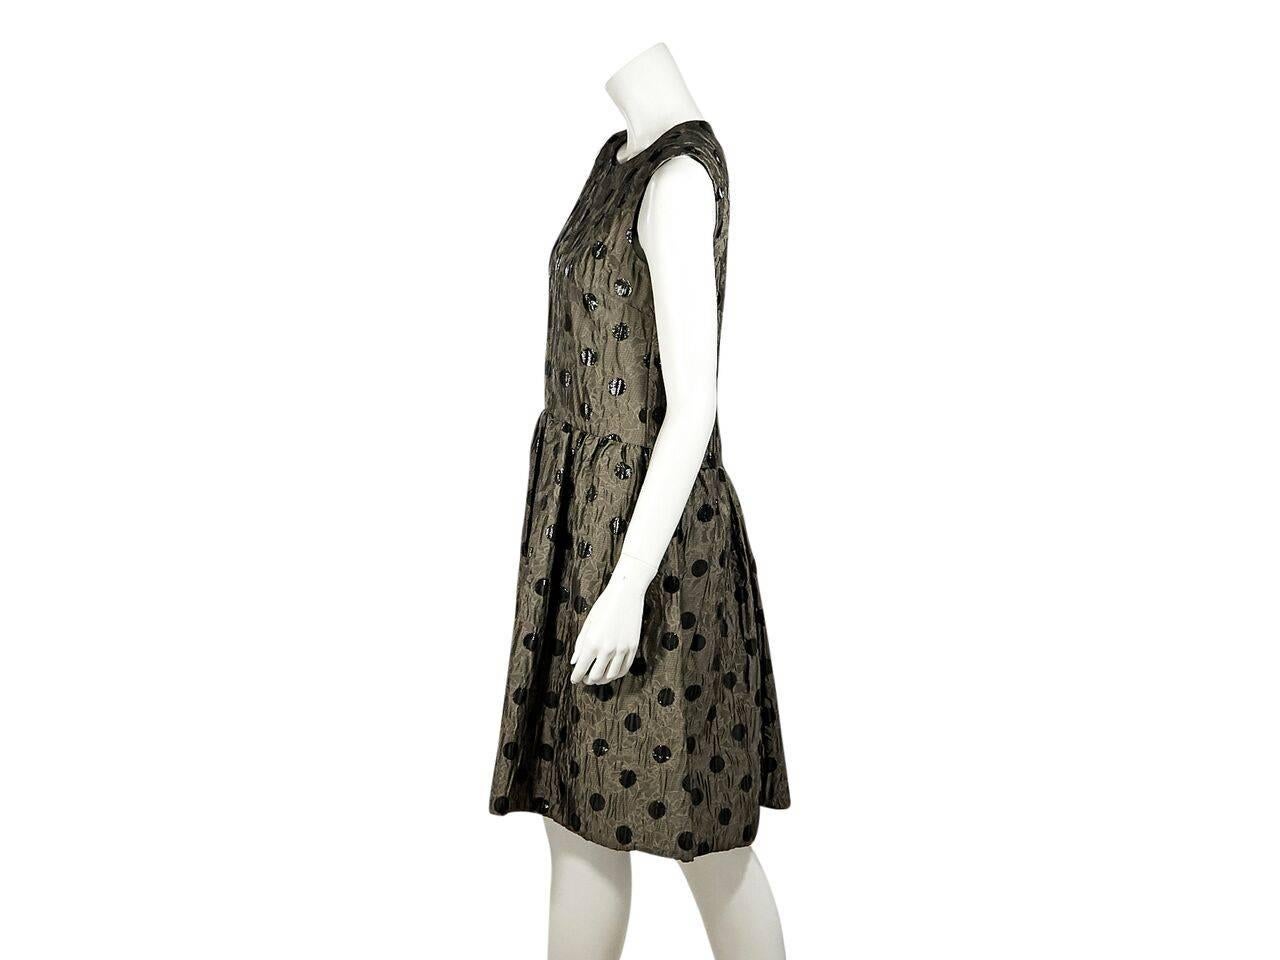 Product details:  Bronze polka-dot jacquard dress by Marc By Marc Jacobs.  Round neck.  Sleeveless.  Exposed back zip closure.  A-line skirting.  
Condition: Pre-owned. New with tags.
Est. Retail $ 698.00